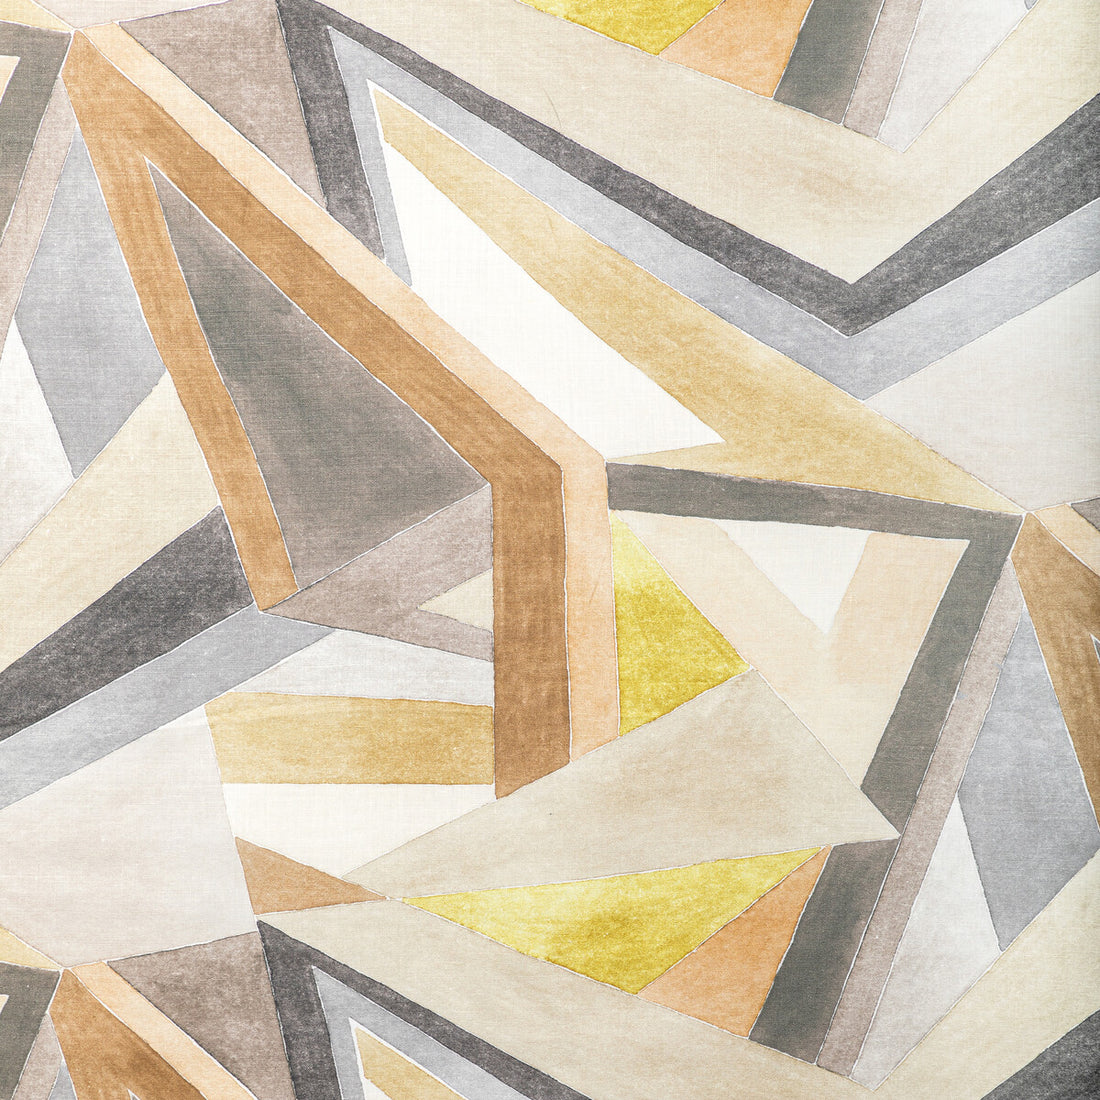 Roulade Print fabric in citron/stone color - pattern GWF-3772.640.0 - by Lee Jofa Modern in the Rhapsody collection